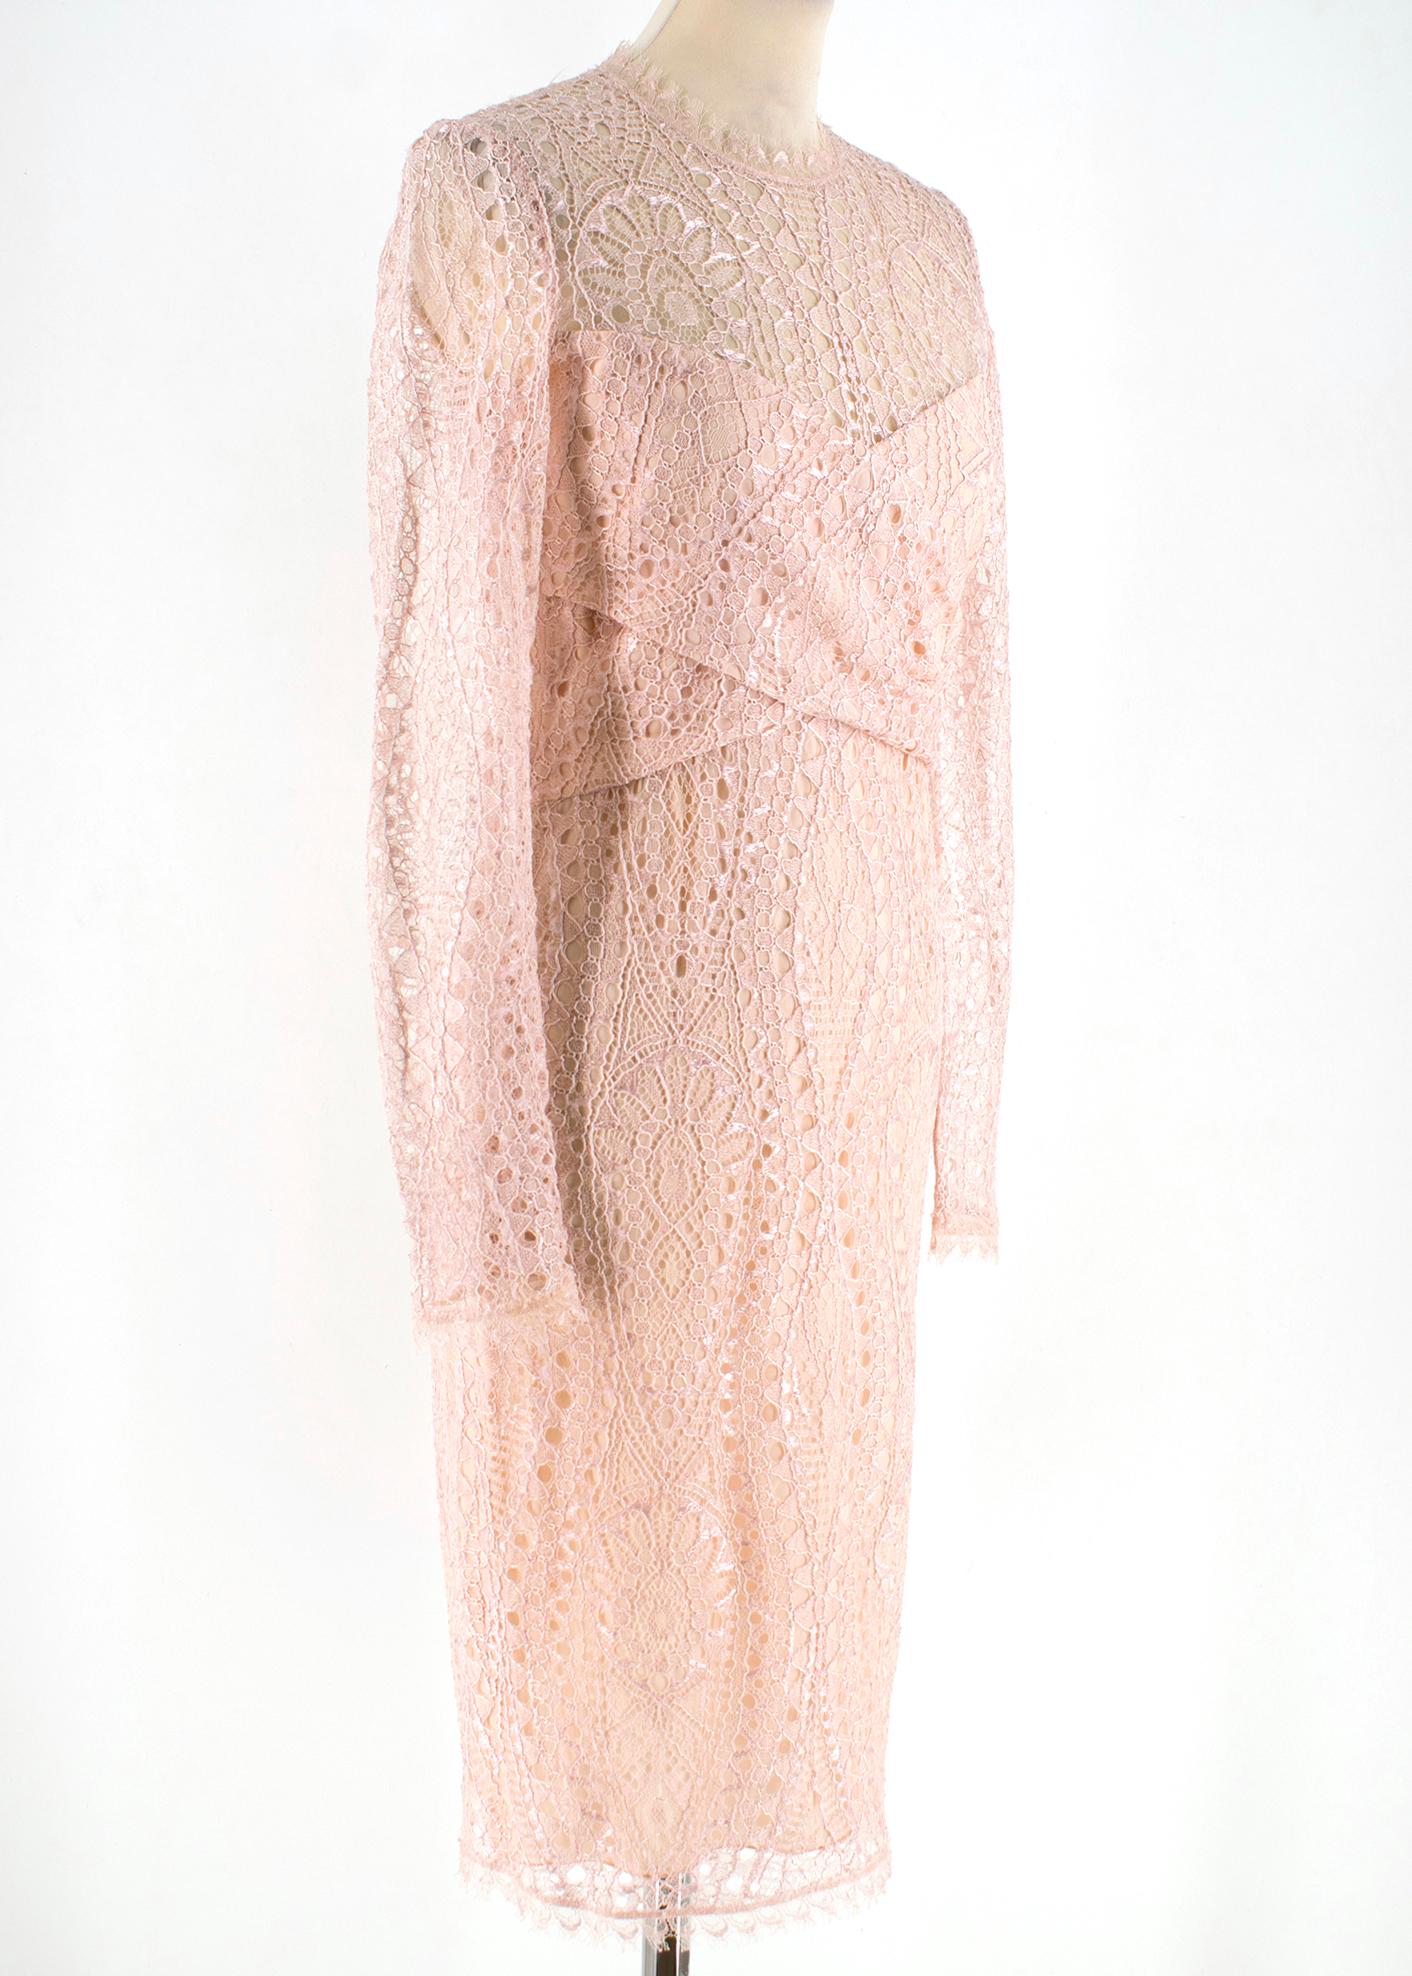 Emilio Pucci Soft Pink Long Sleeved Midi Dress RRP £1175.00

- Front Wrap Detail 
- Round Neckline 
- Long Sleeves
- Back Zip Closure 
- Small Slit Centre Back 

60% Viscose
40% Nylon 
Lining 
68% Silk 
27% Nylon 
5% Elastane 

Made in Italy